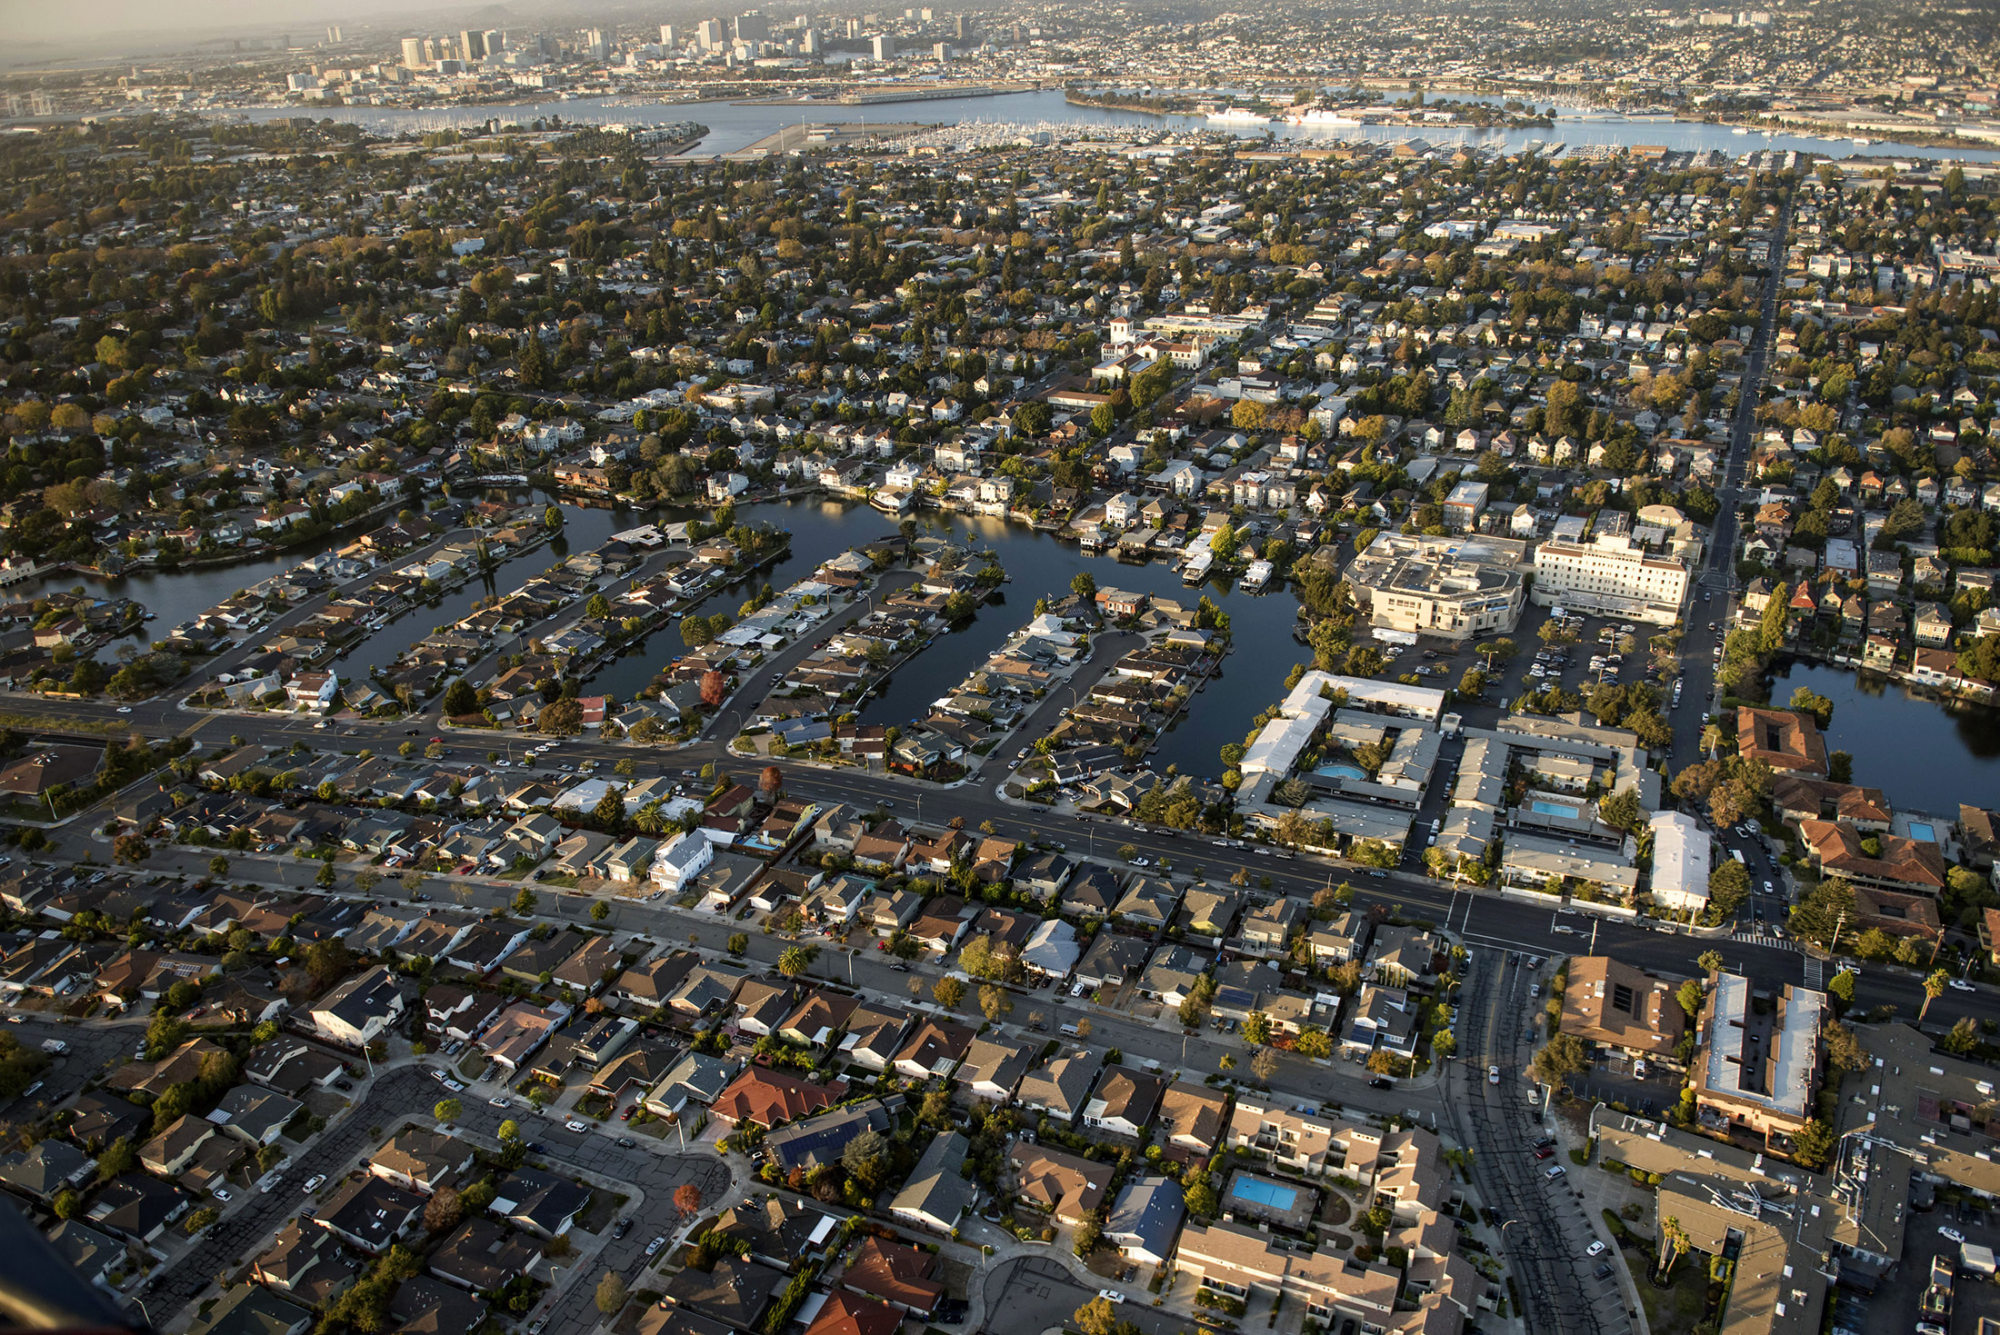 Houses stand in this aerial photograph taken above Alameda, California, U.S., on Monday, Oct. 5, 2015. With tech workers flooding San Francisco, one-bedroom apartment rents have climbed to $3,500 a month, more than in any other U.S. city.
